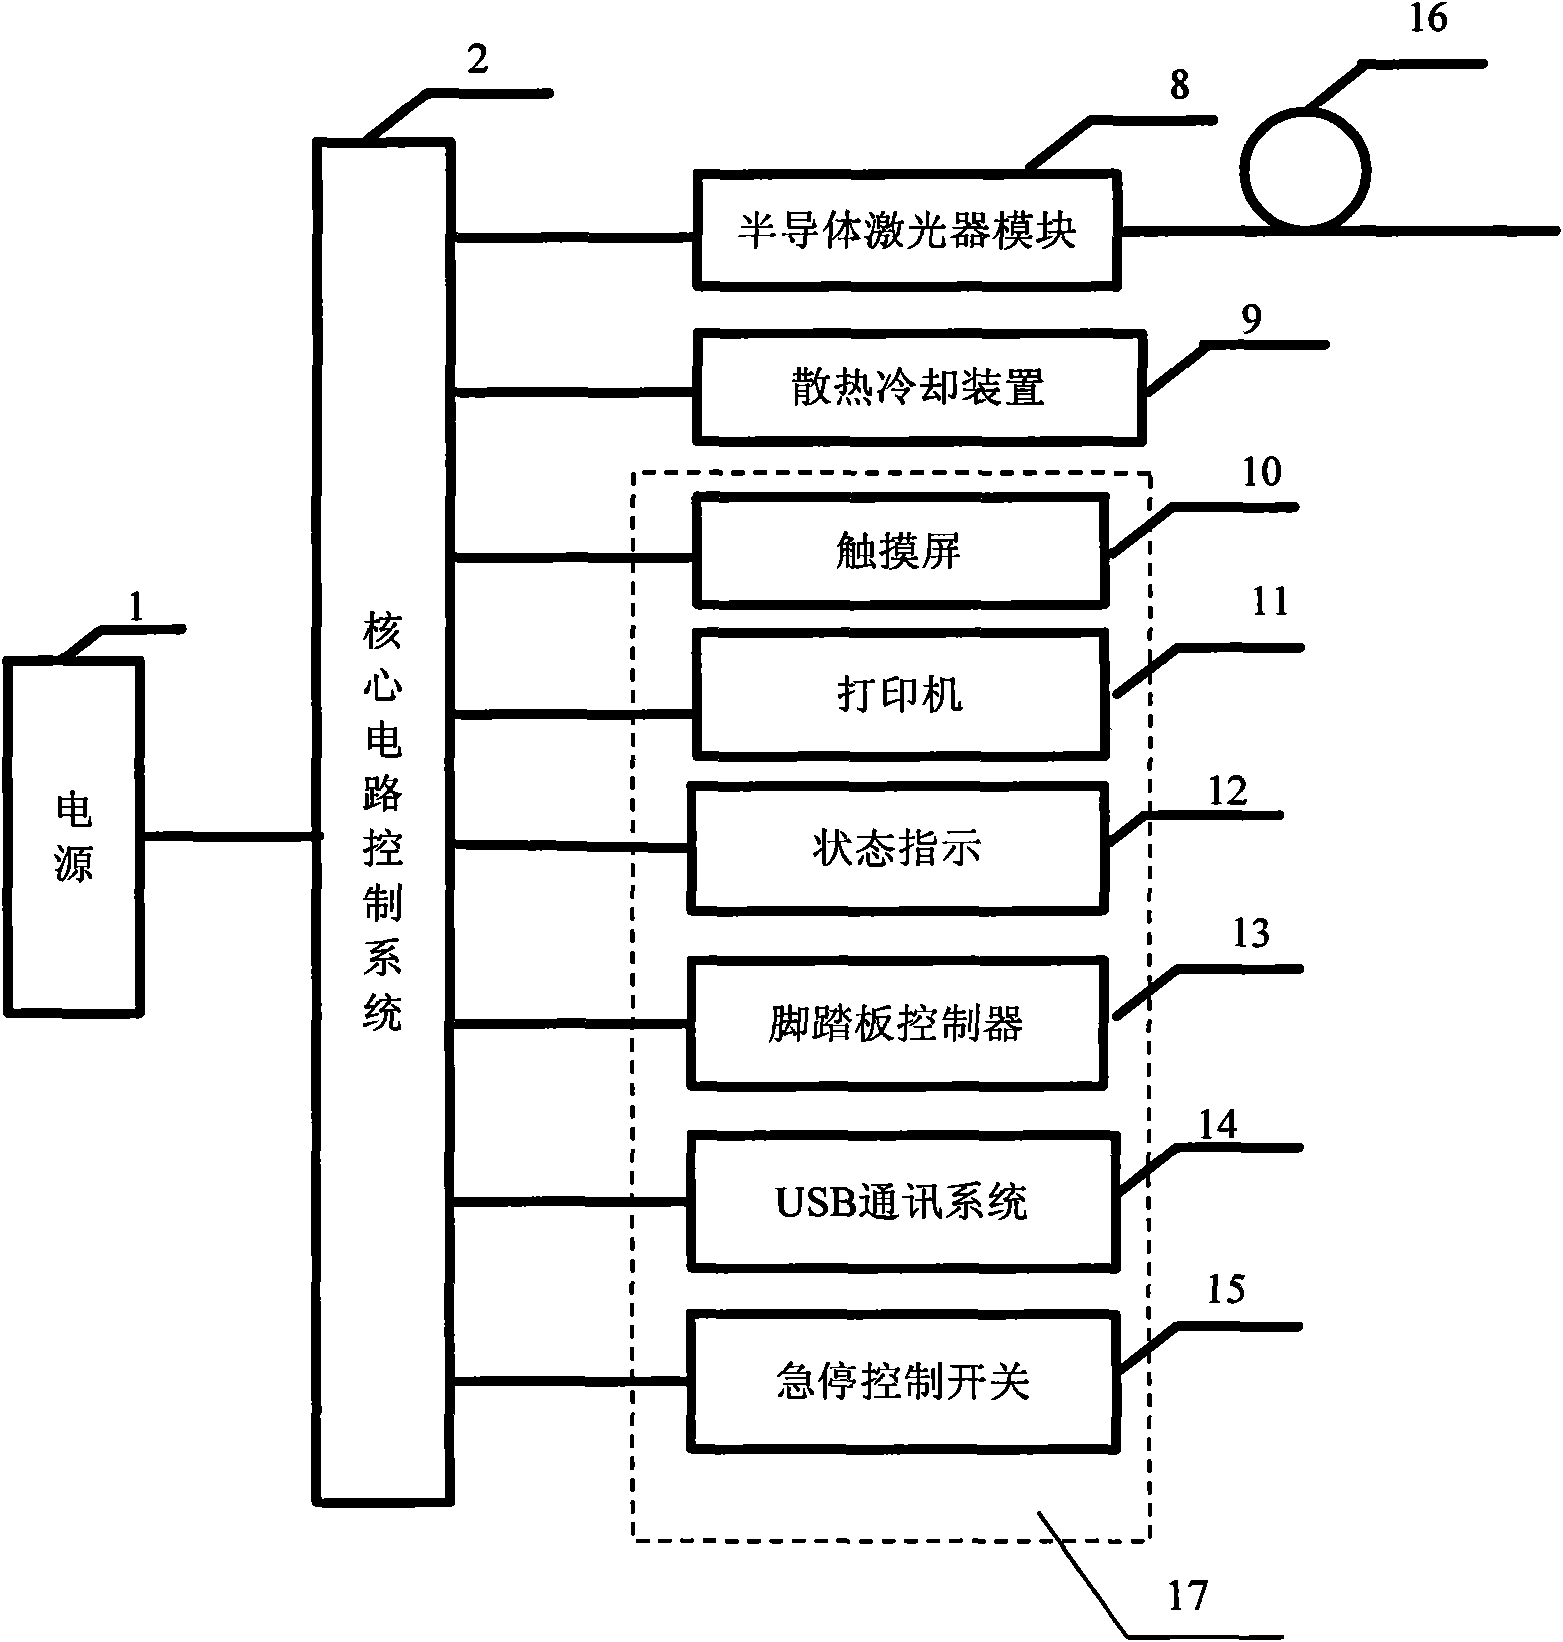 Long-wave high-power semiconductor laser comprehensive therapeutic instrument